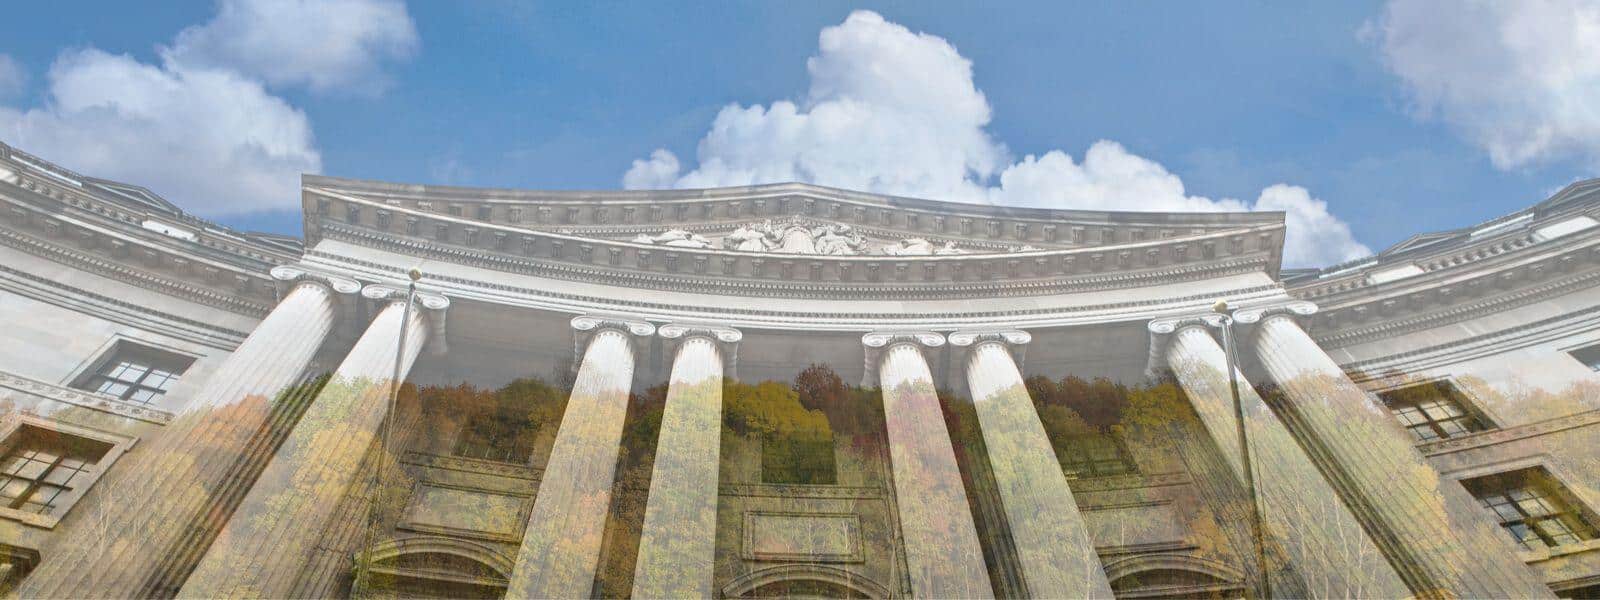 Photo of government building overlaid in low opacity over a forest